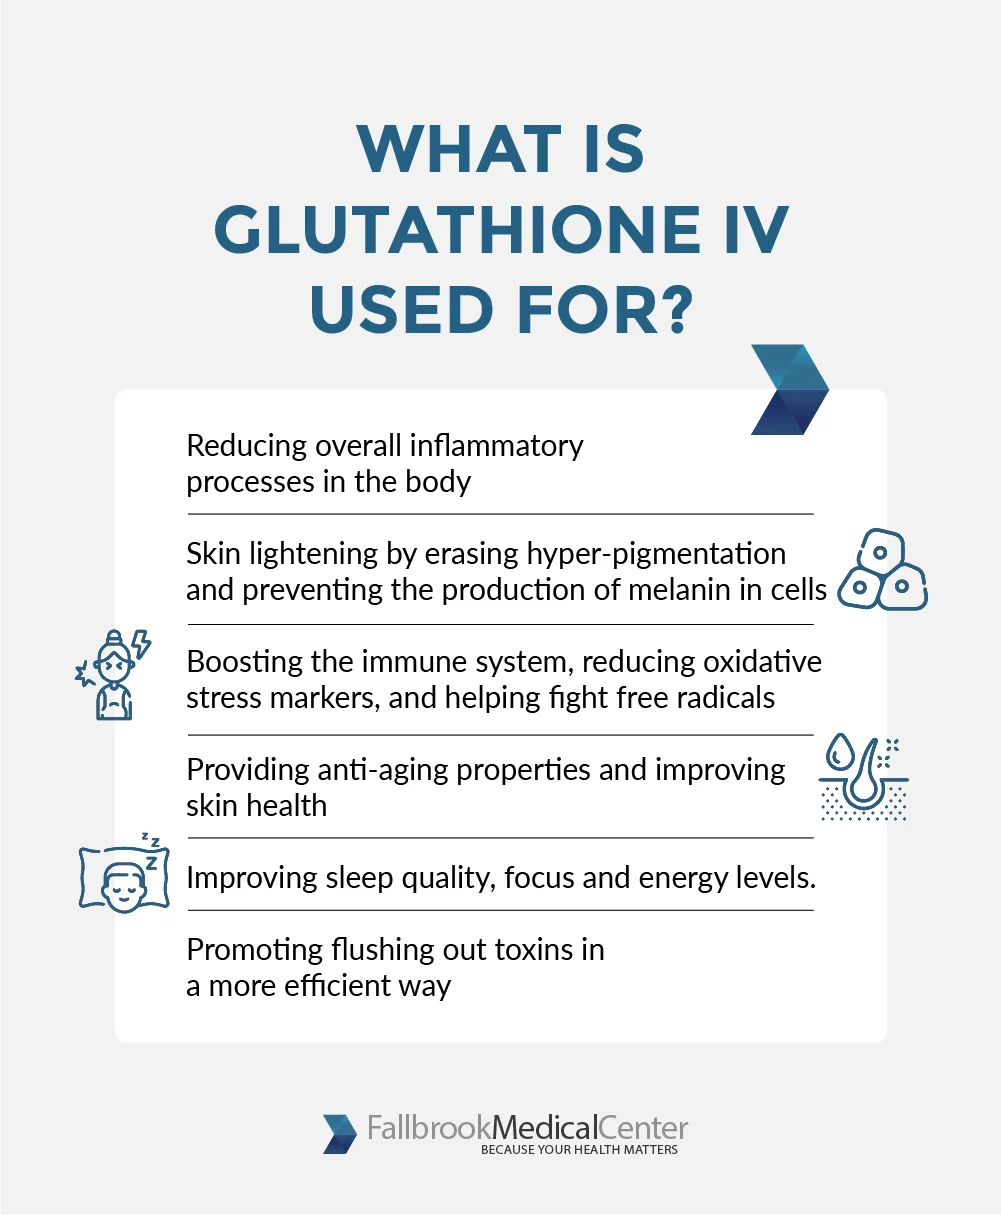 What is Glutathione IV Used For?